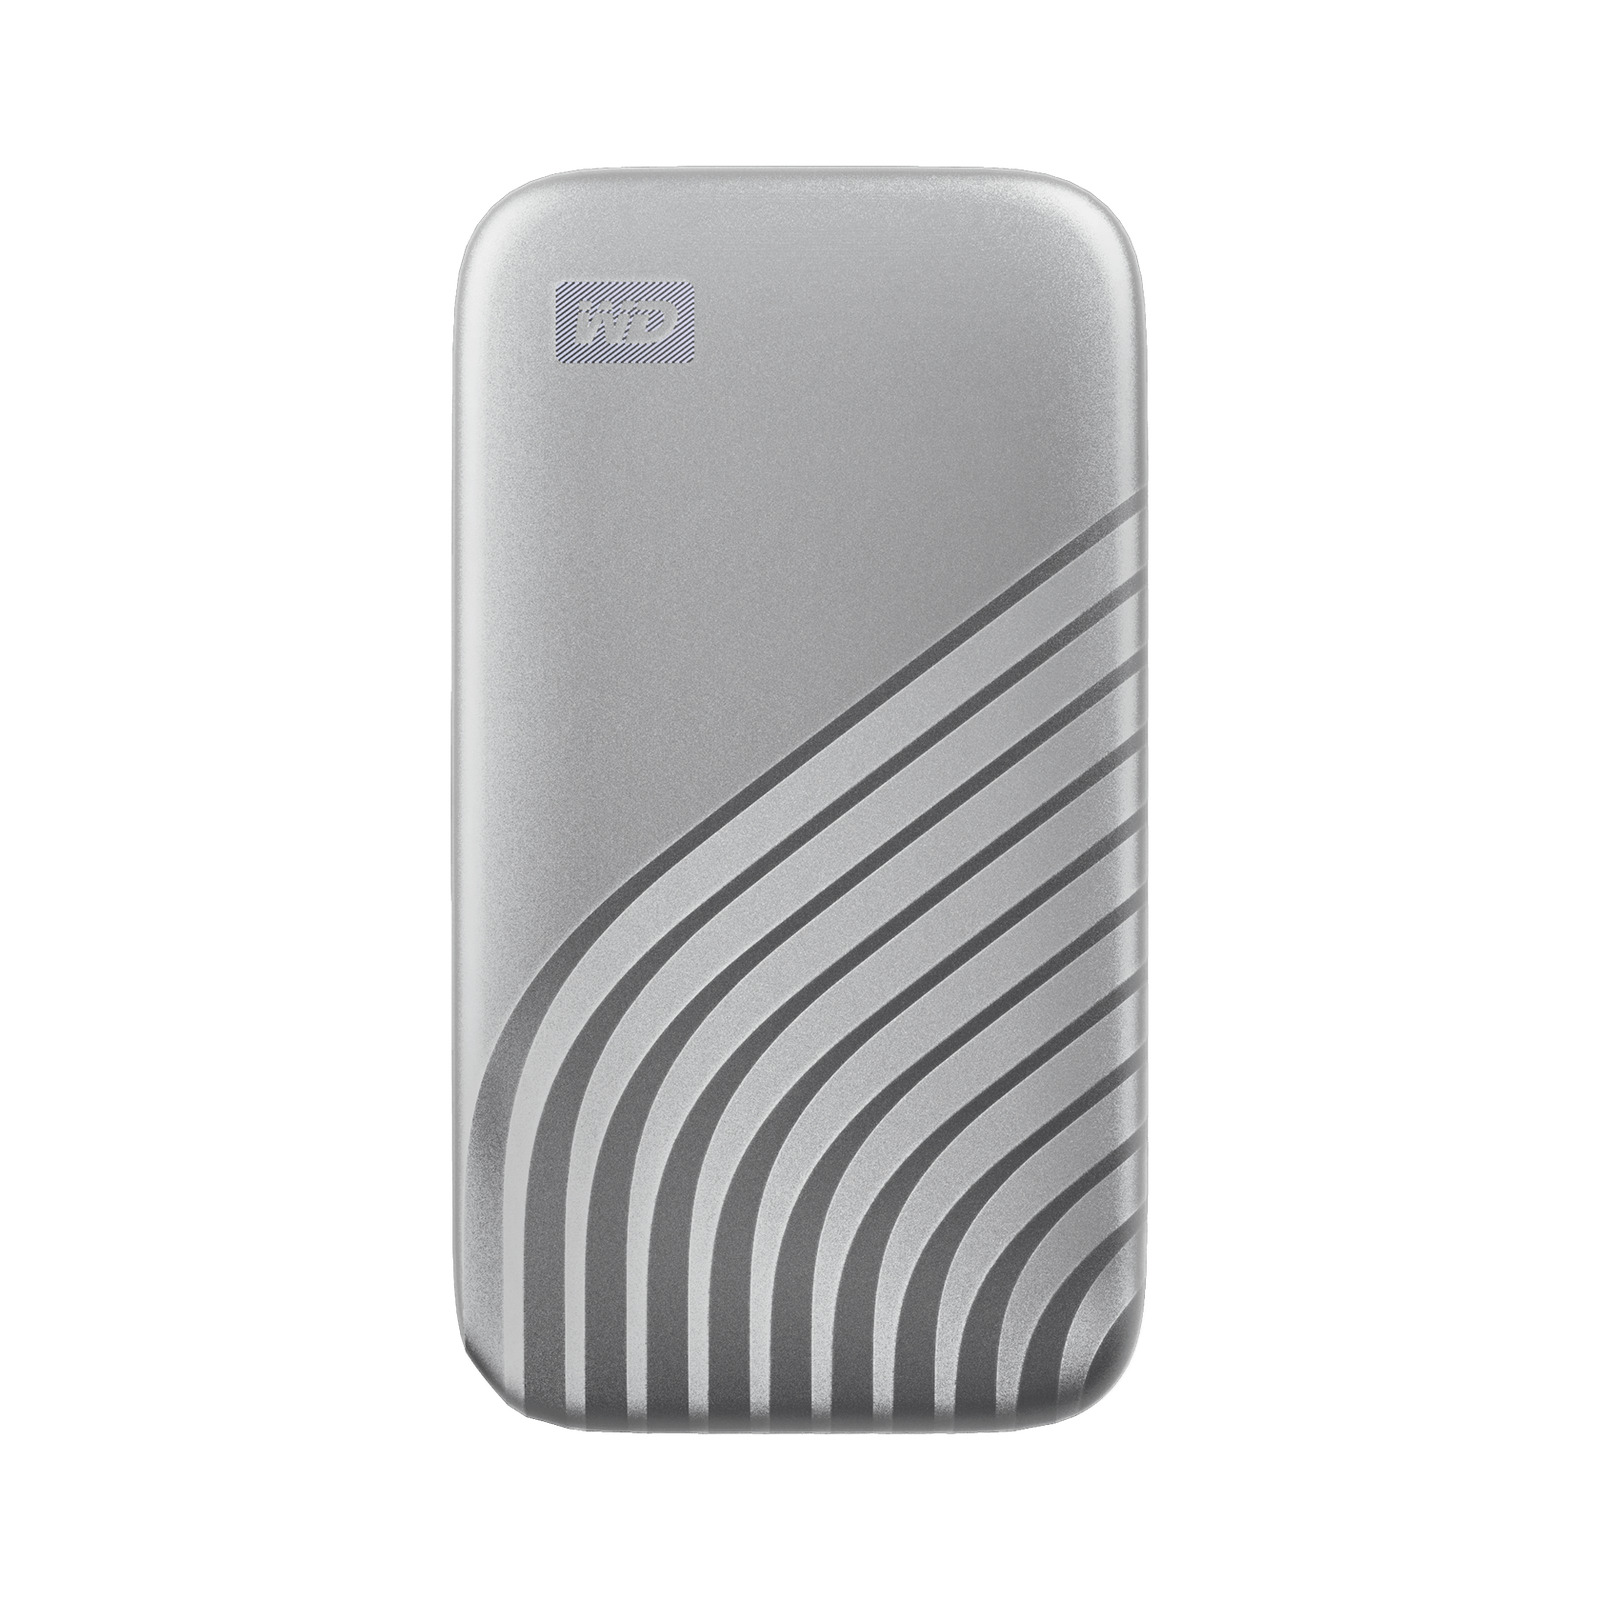 WD 1TB My Passport SSD, Portable External Solid State Drive - WDBAGF0010BSL-WESN